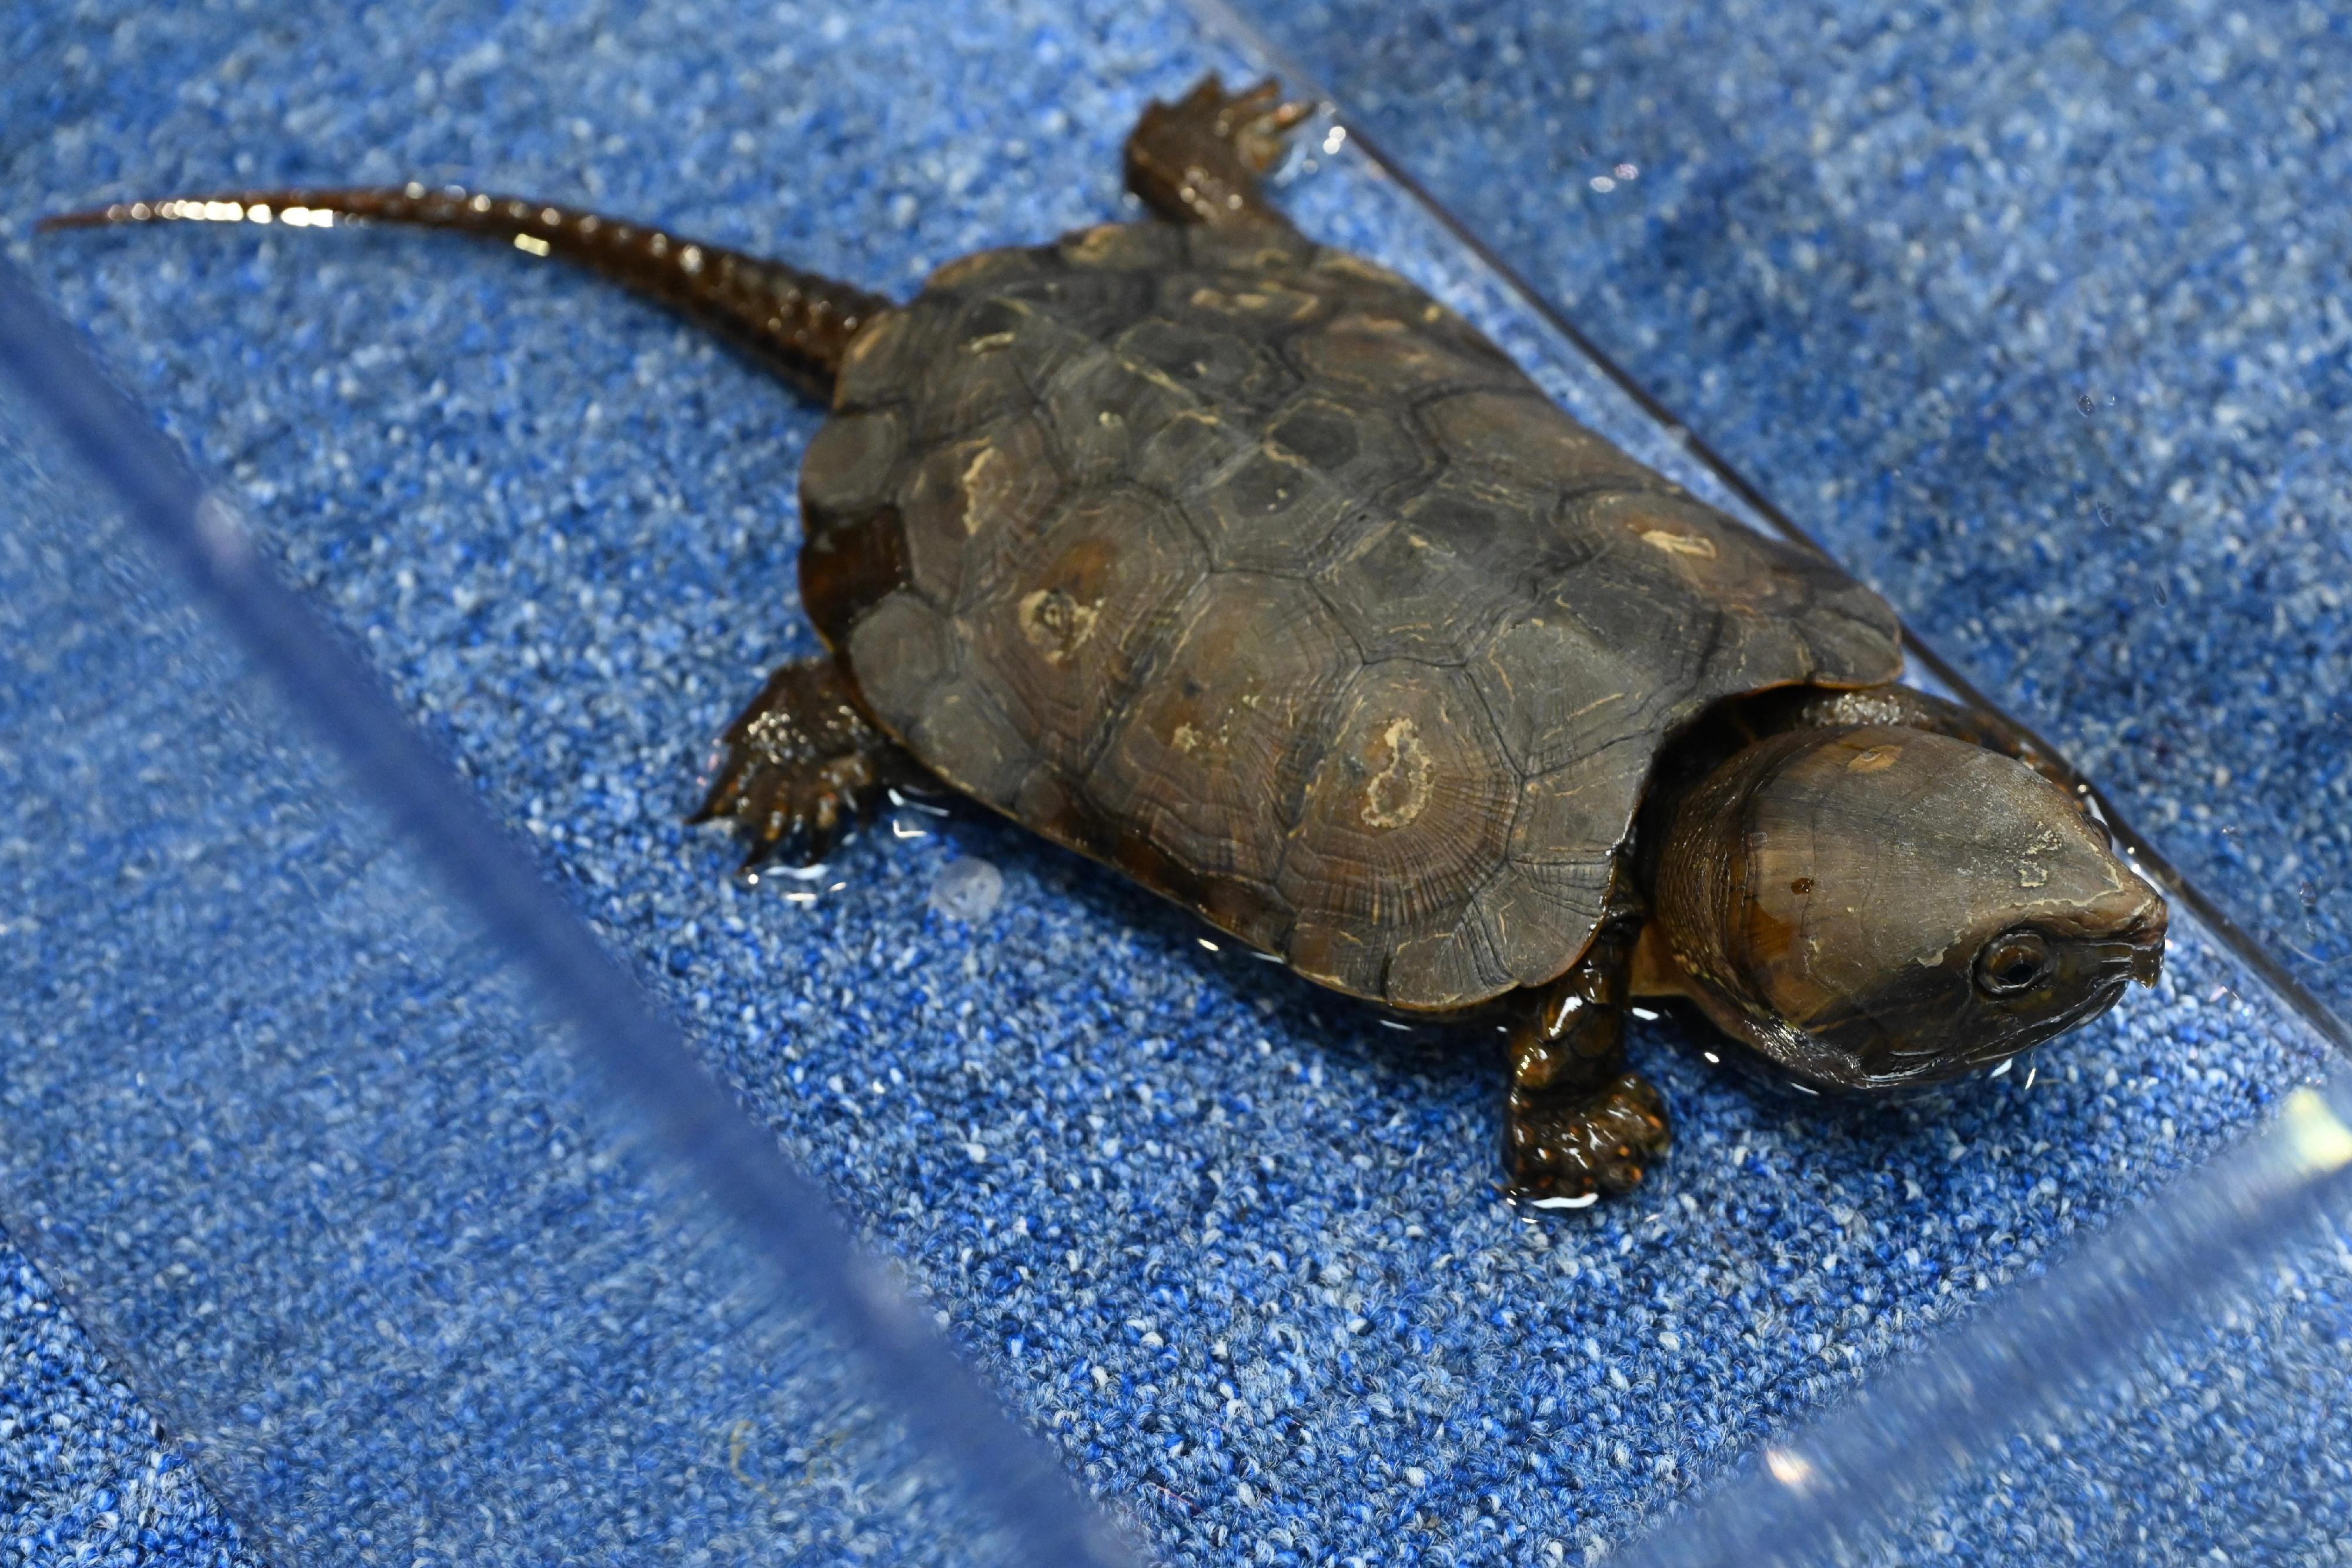 The Agriculture, Fisheries and Conservation Department conducted a joint operation with the Hong Kong Police Force on May 17 on a case of suspected illegal possession of endangered species. Thirty-one specimens of turtles suspected of being illegally possessed were seized on a premises. Photo shows a big-headed turtle (Platysternon megacephalum), which is listed on Appendix I to the Convention on International Trade in Endangered Species of Wild Fauna and Flora, seized by the officers.